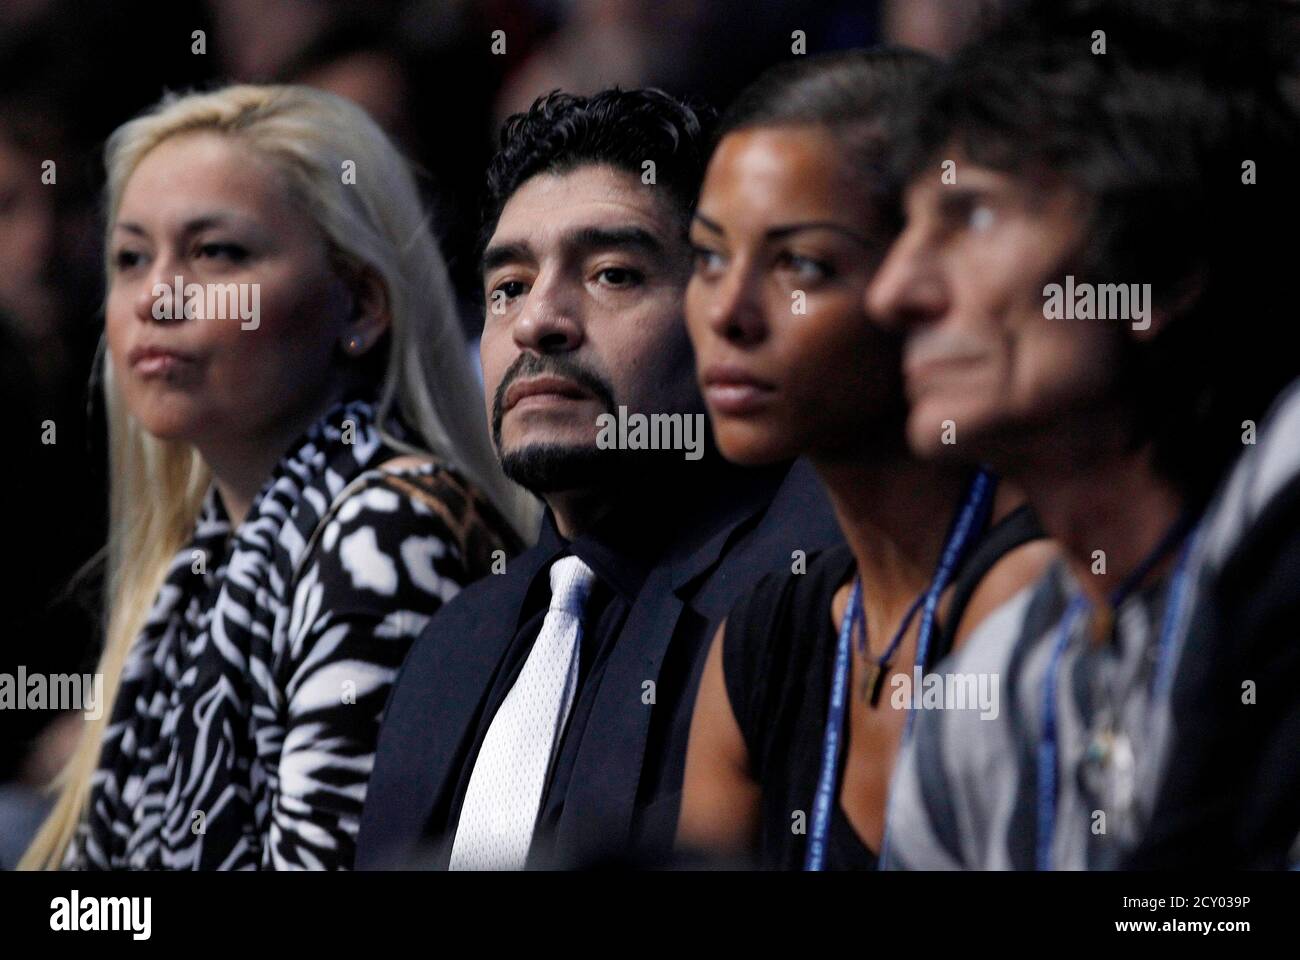 Veronica Ojeda (L), former Argentine soccer star Diego Maradona (2nd L), British musician Ron Wood (R) and his girlfriend Ana Araujo watch the finals match between Spain's Rafael Nadal and Switzerland's Roger Federer at the ATP World Tour Finals in London November 28, 2010. REUTERS/Suzanne Plunkett (BRITAIN - Tags: SPORT TENNIS ENTERTAINMENT SOCCER) Stock Photo